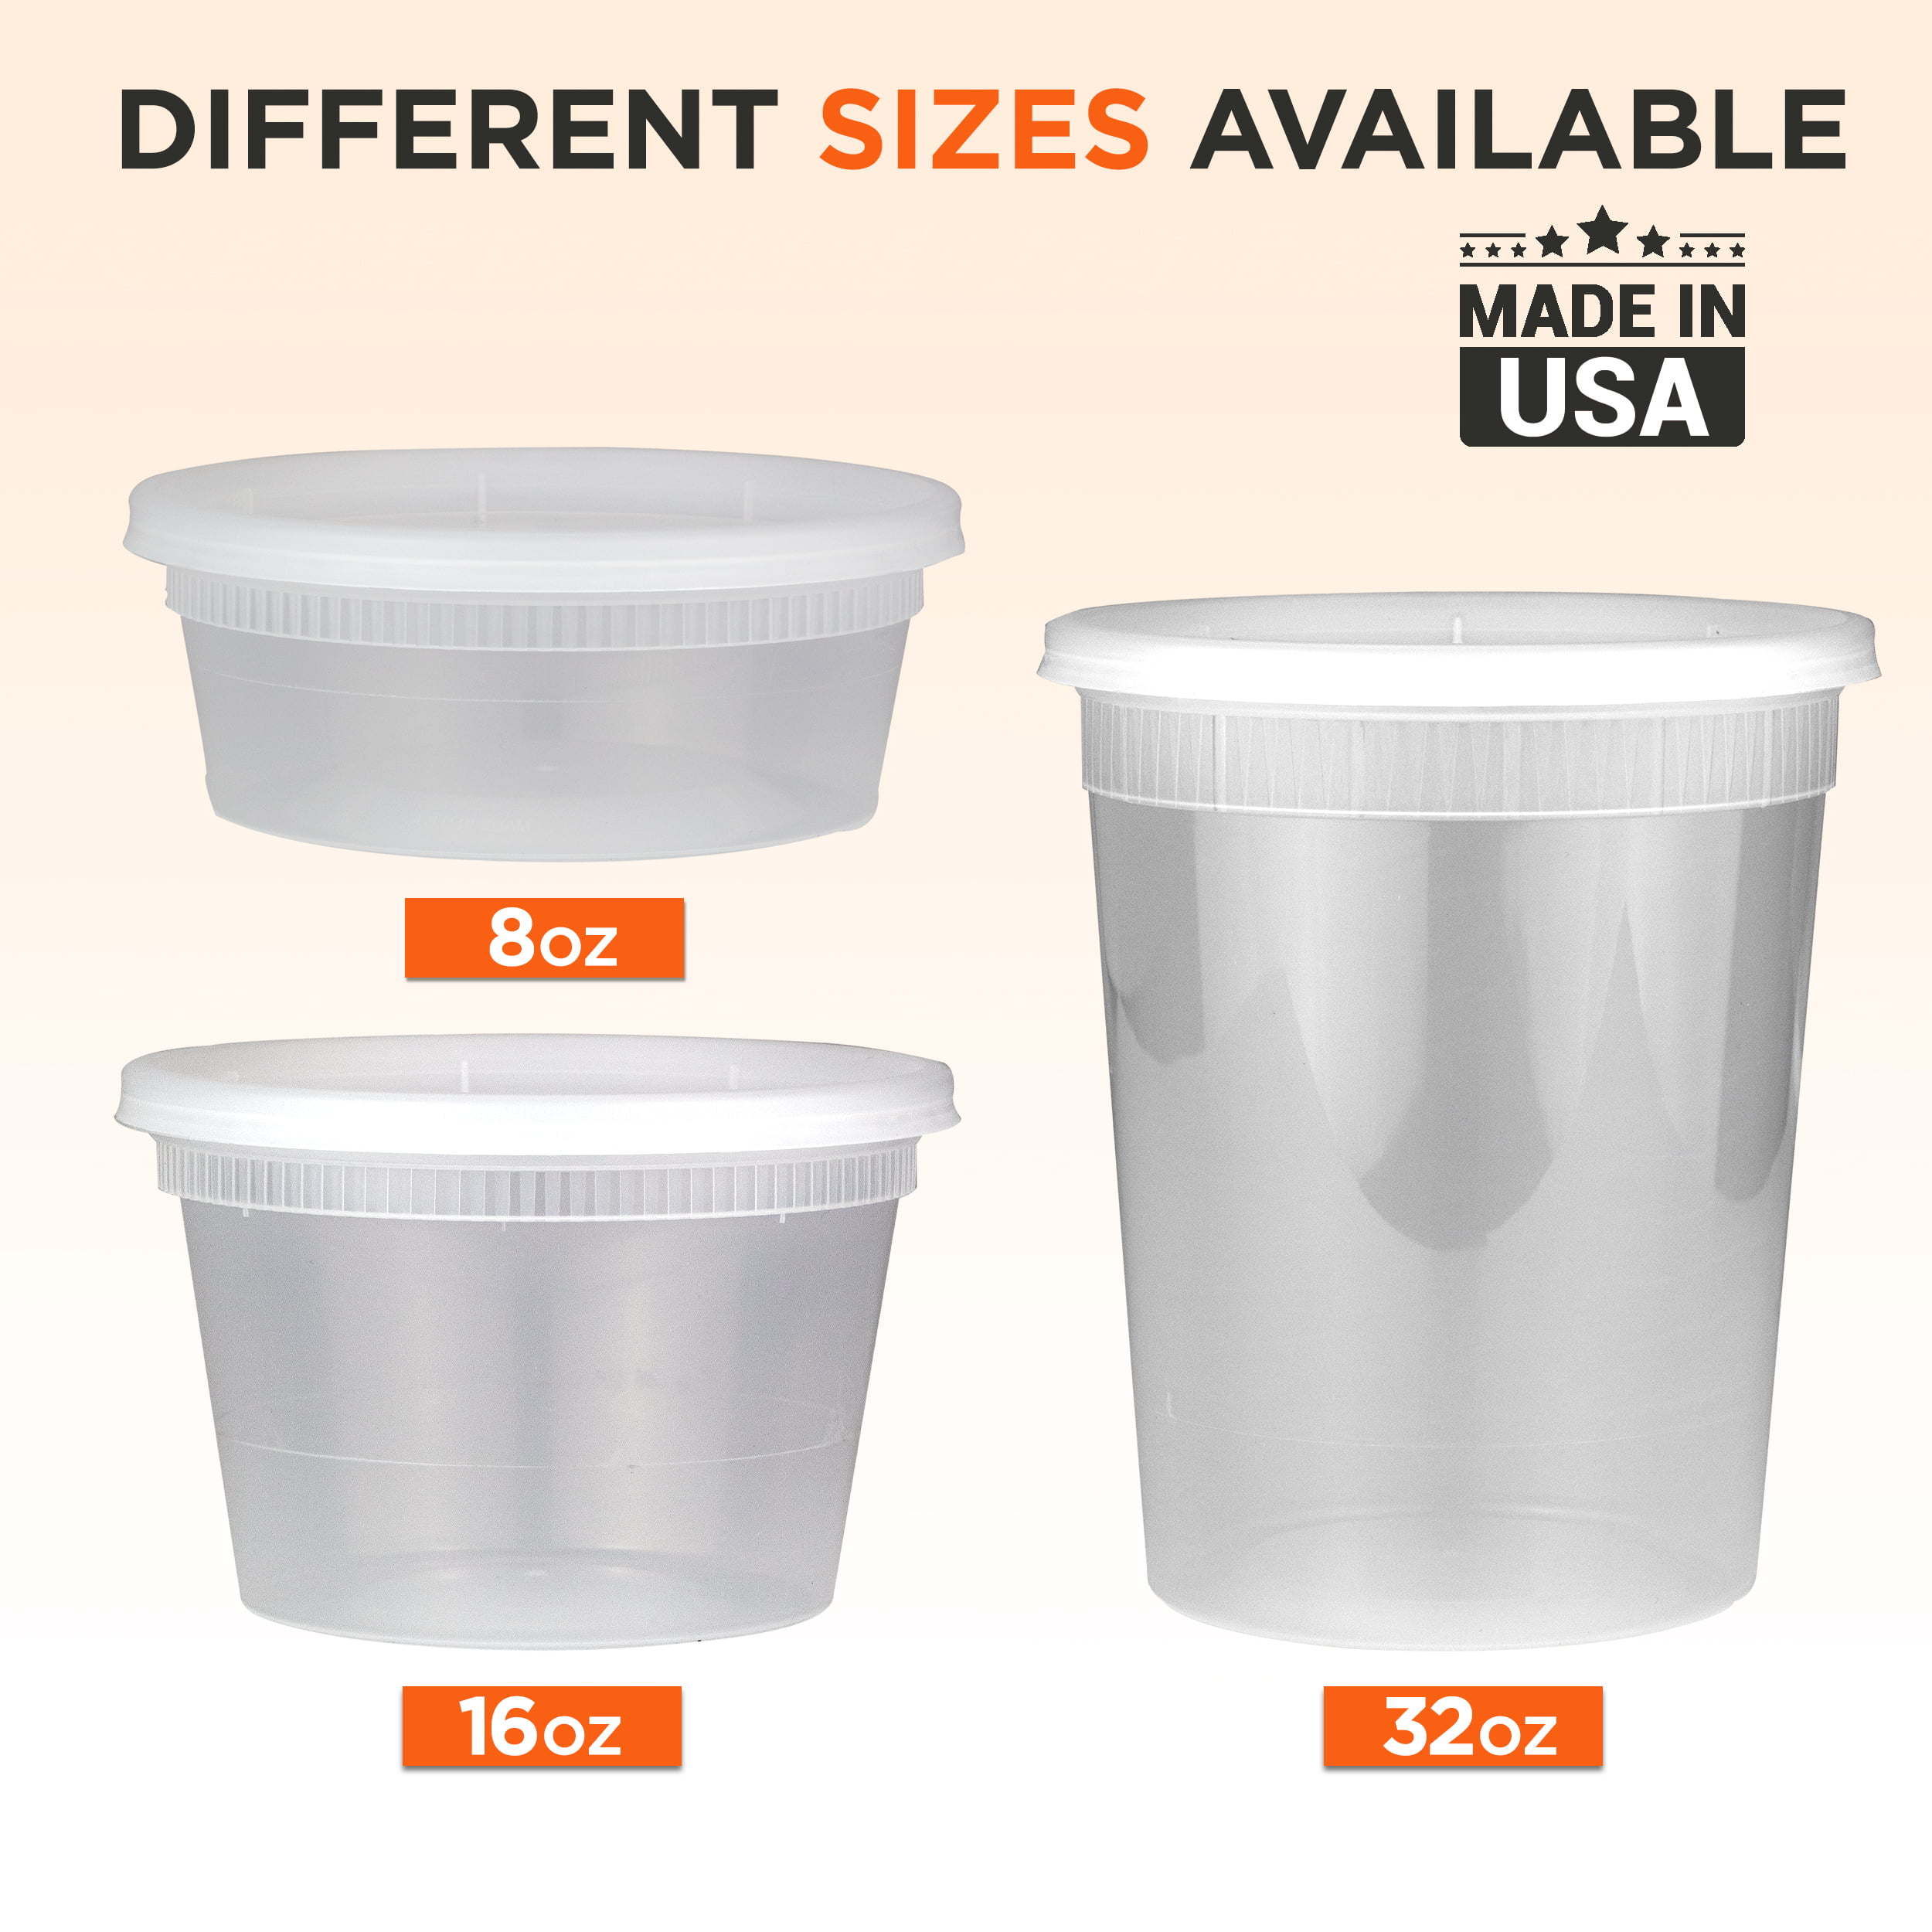 Plasticpro Clear Deli Containers with Lid Reusable Small Plastic Container Set, 3-Pack 32 oz, Size: 32 Ounce